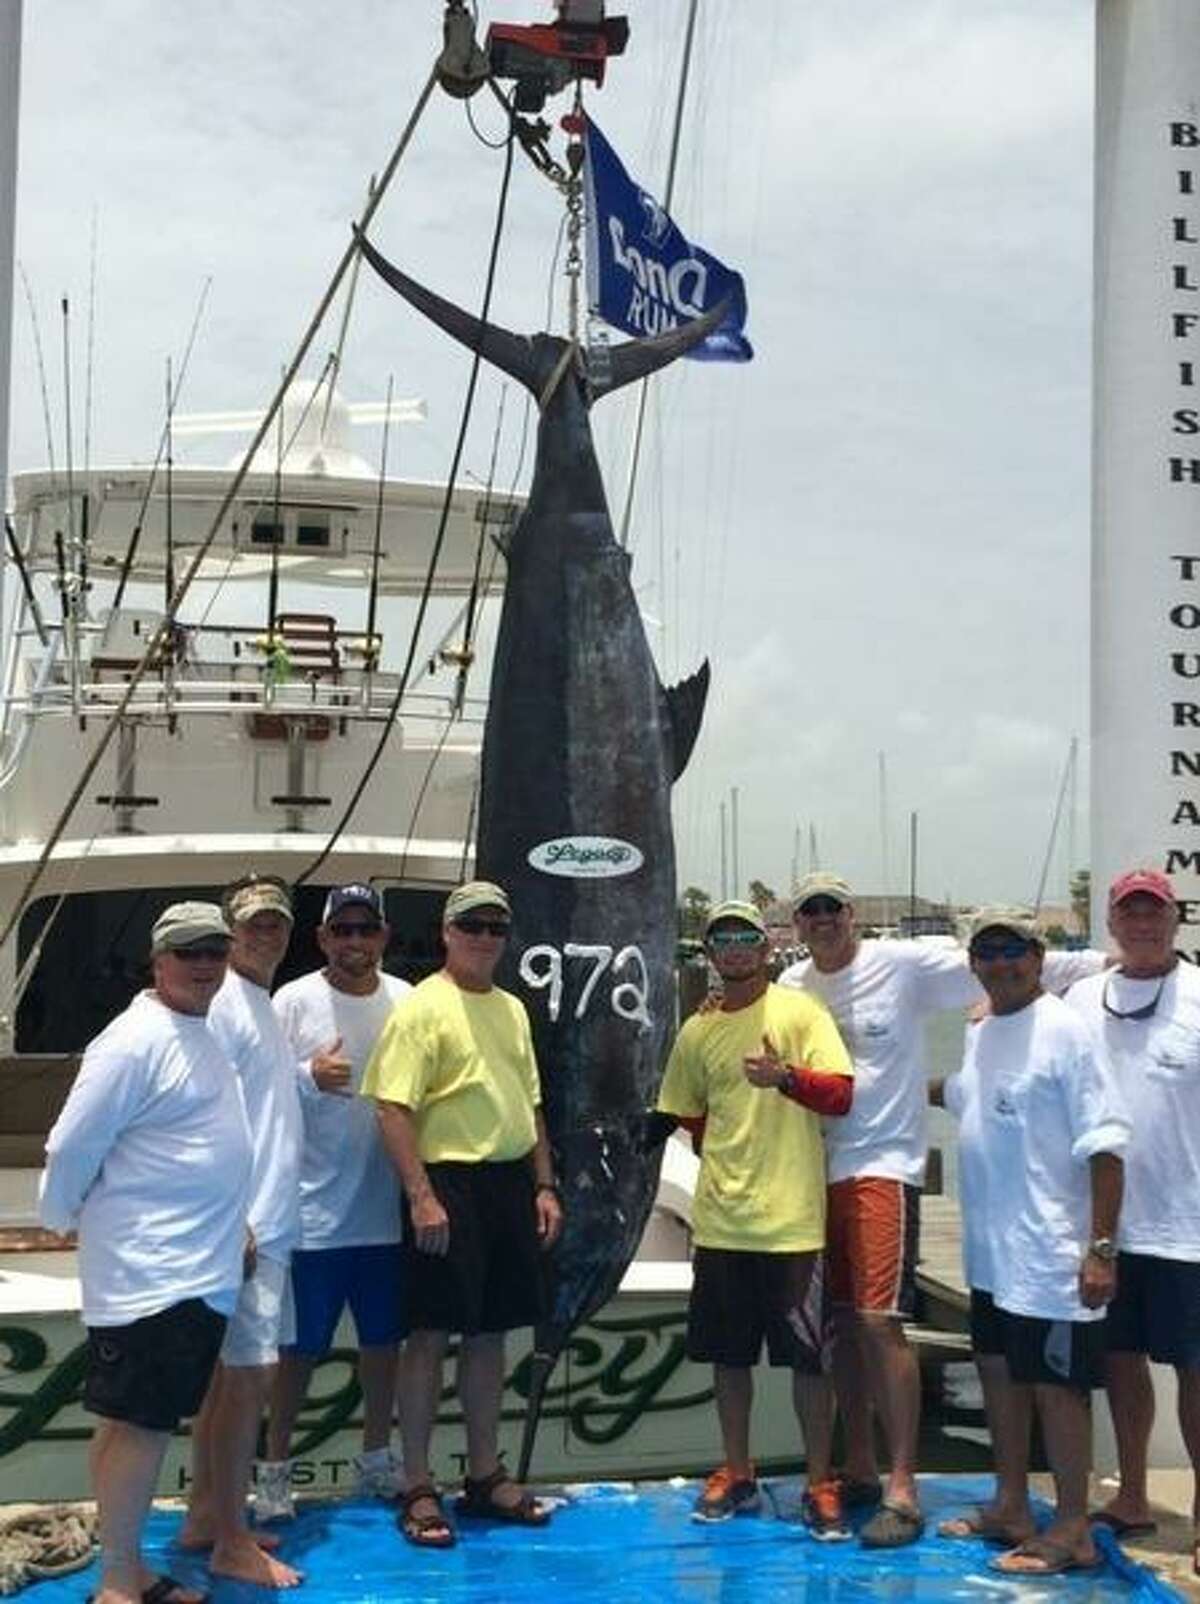 Legacy Fishing Team reeled in a record-setting blue marlin on July 11, 2014. The fish weighs 972.7 pounds and measures 137.5 inches.